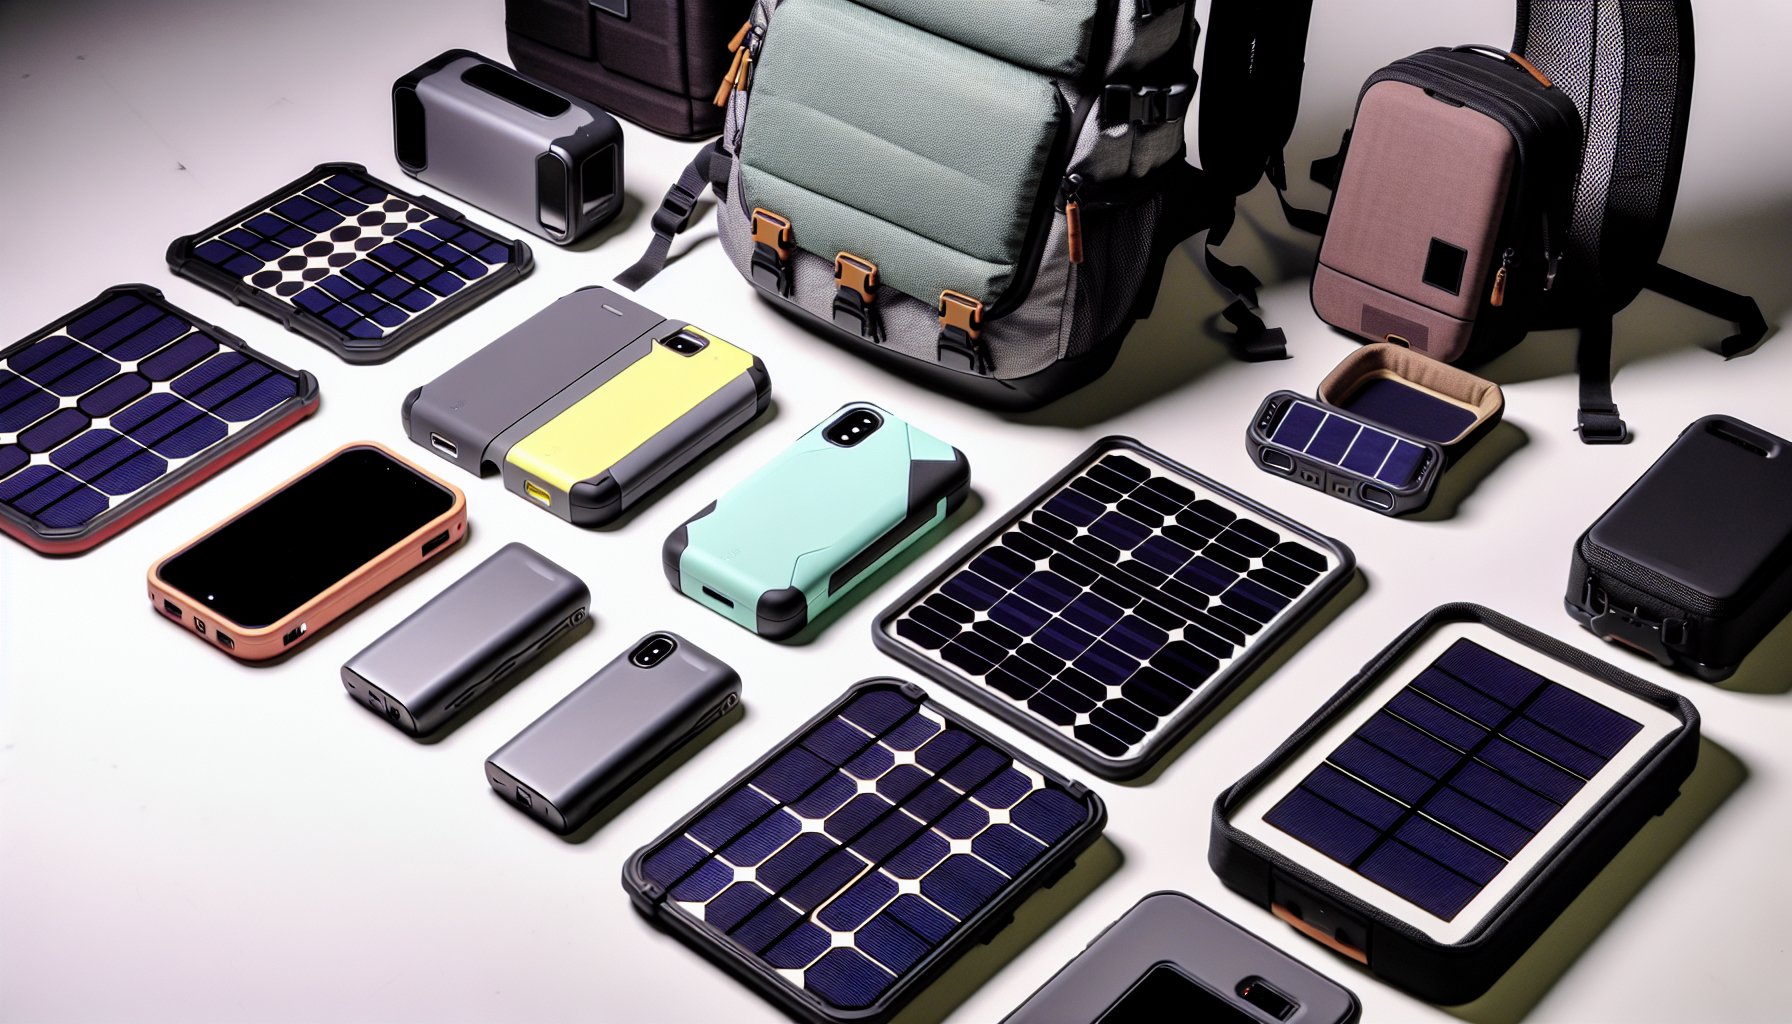 Solar panels and portable power devices